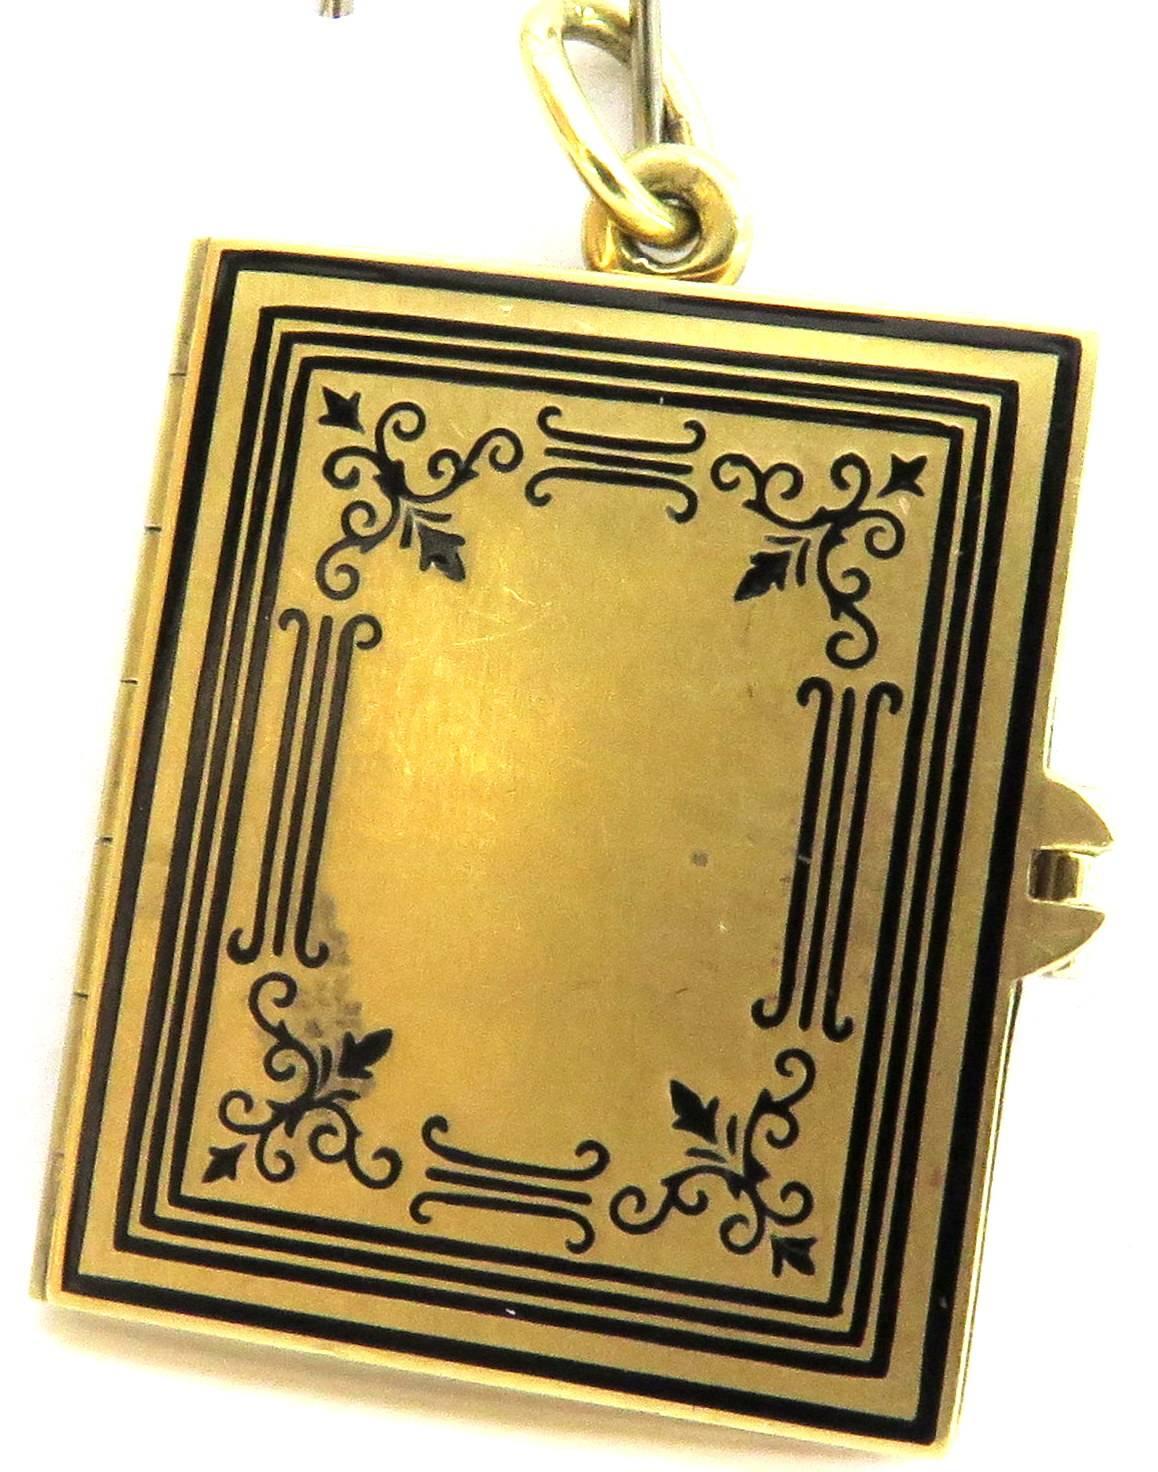 This wonderful charm, pendant, locket, has the most beautifully detailed enamel I've ever seen. The enamel is on the front & back of this charm. There are 3 pages that can be engraved or you can put pictures inside. 
This charm, when closed measures